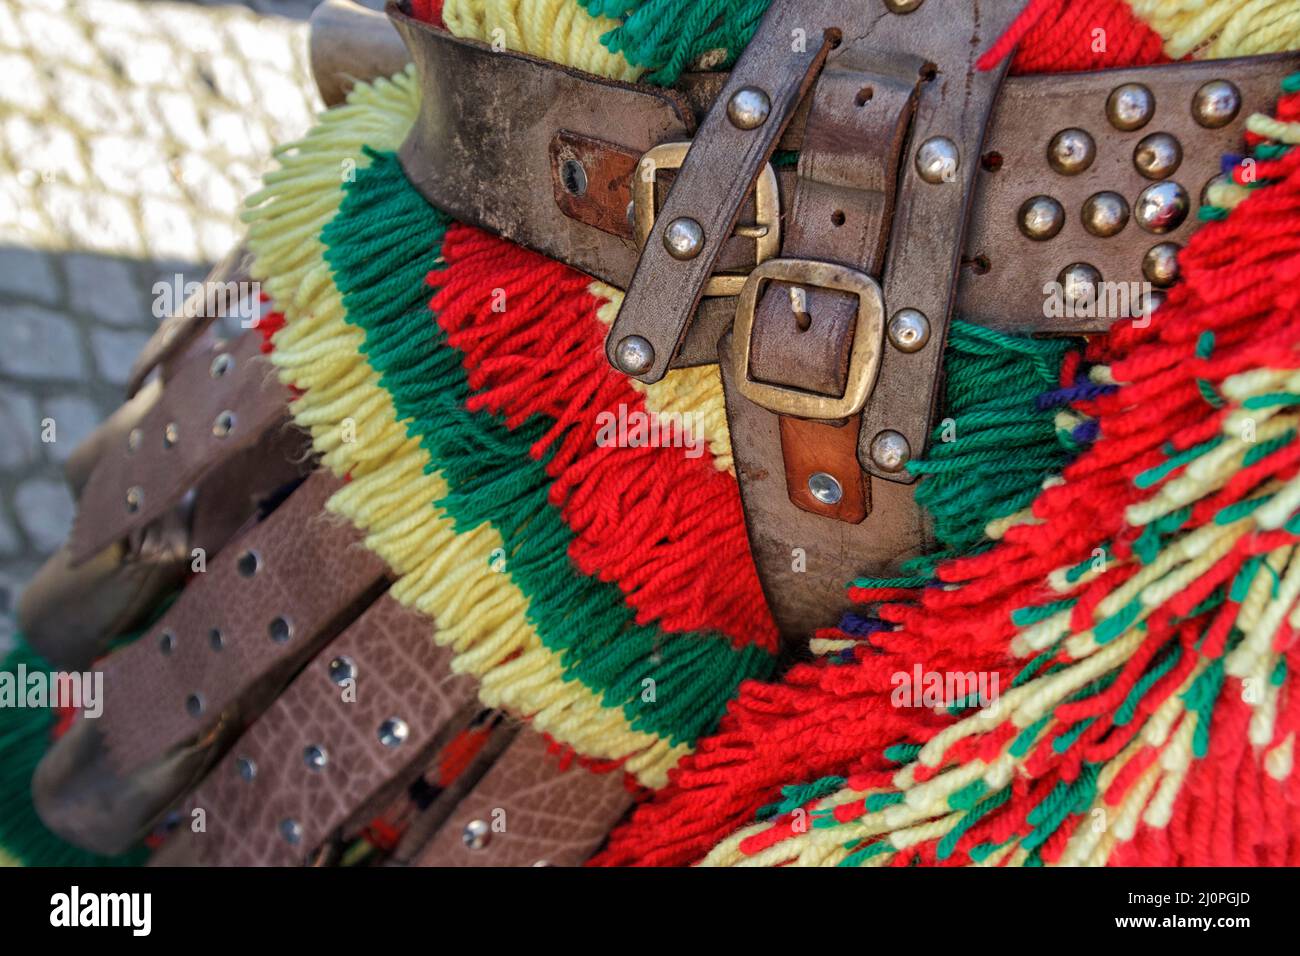 The Caretos - leather belting with studs and buckles, and red, yellow and green fringing - costume detail. Stock Photo